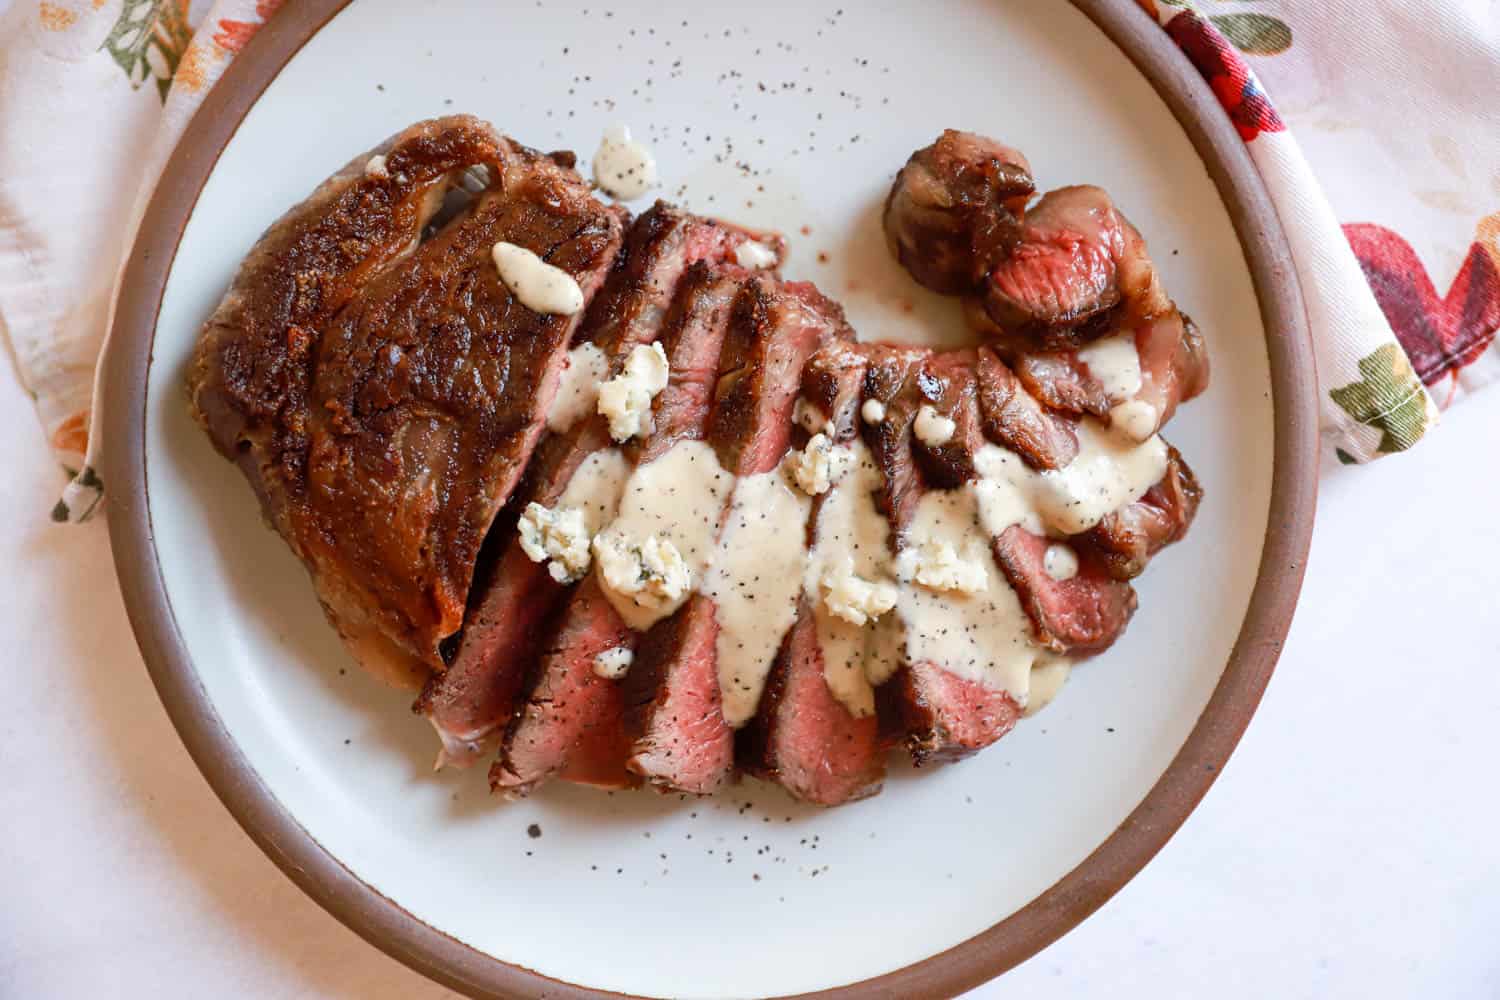 Round plate of sliced ribeye with gorgonzola sauce drizzled over top.